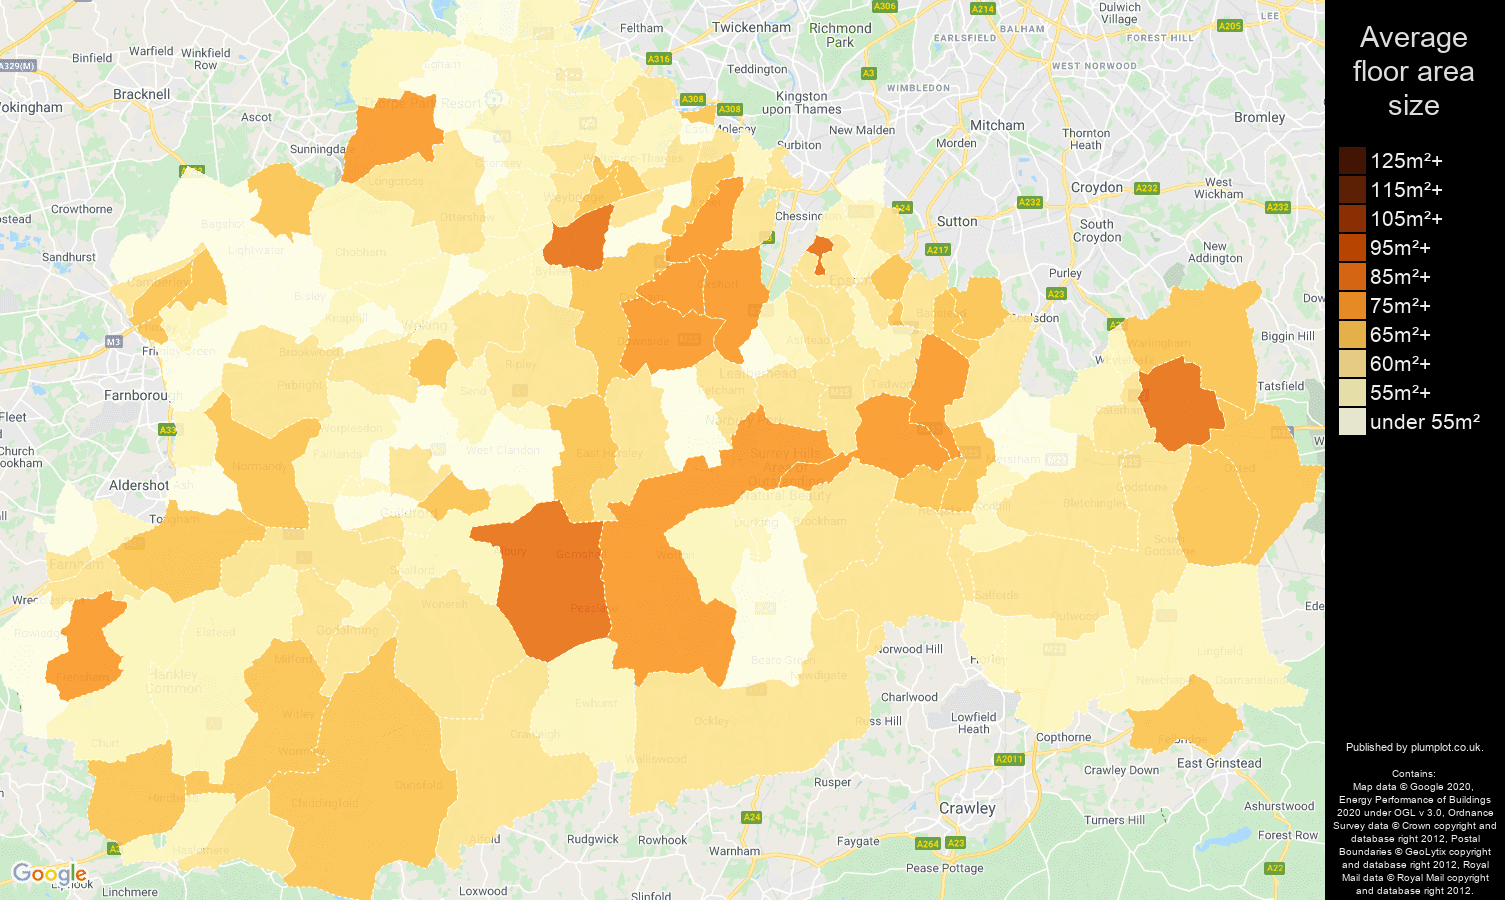 Surrey map of average floor area size of flats